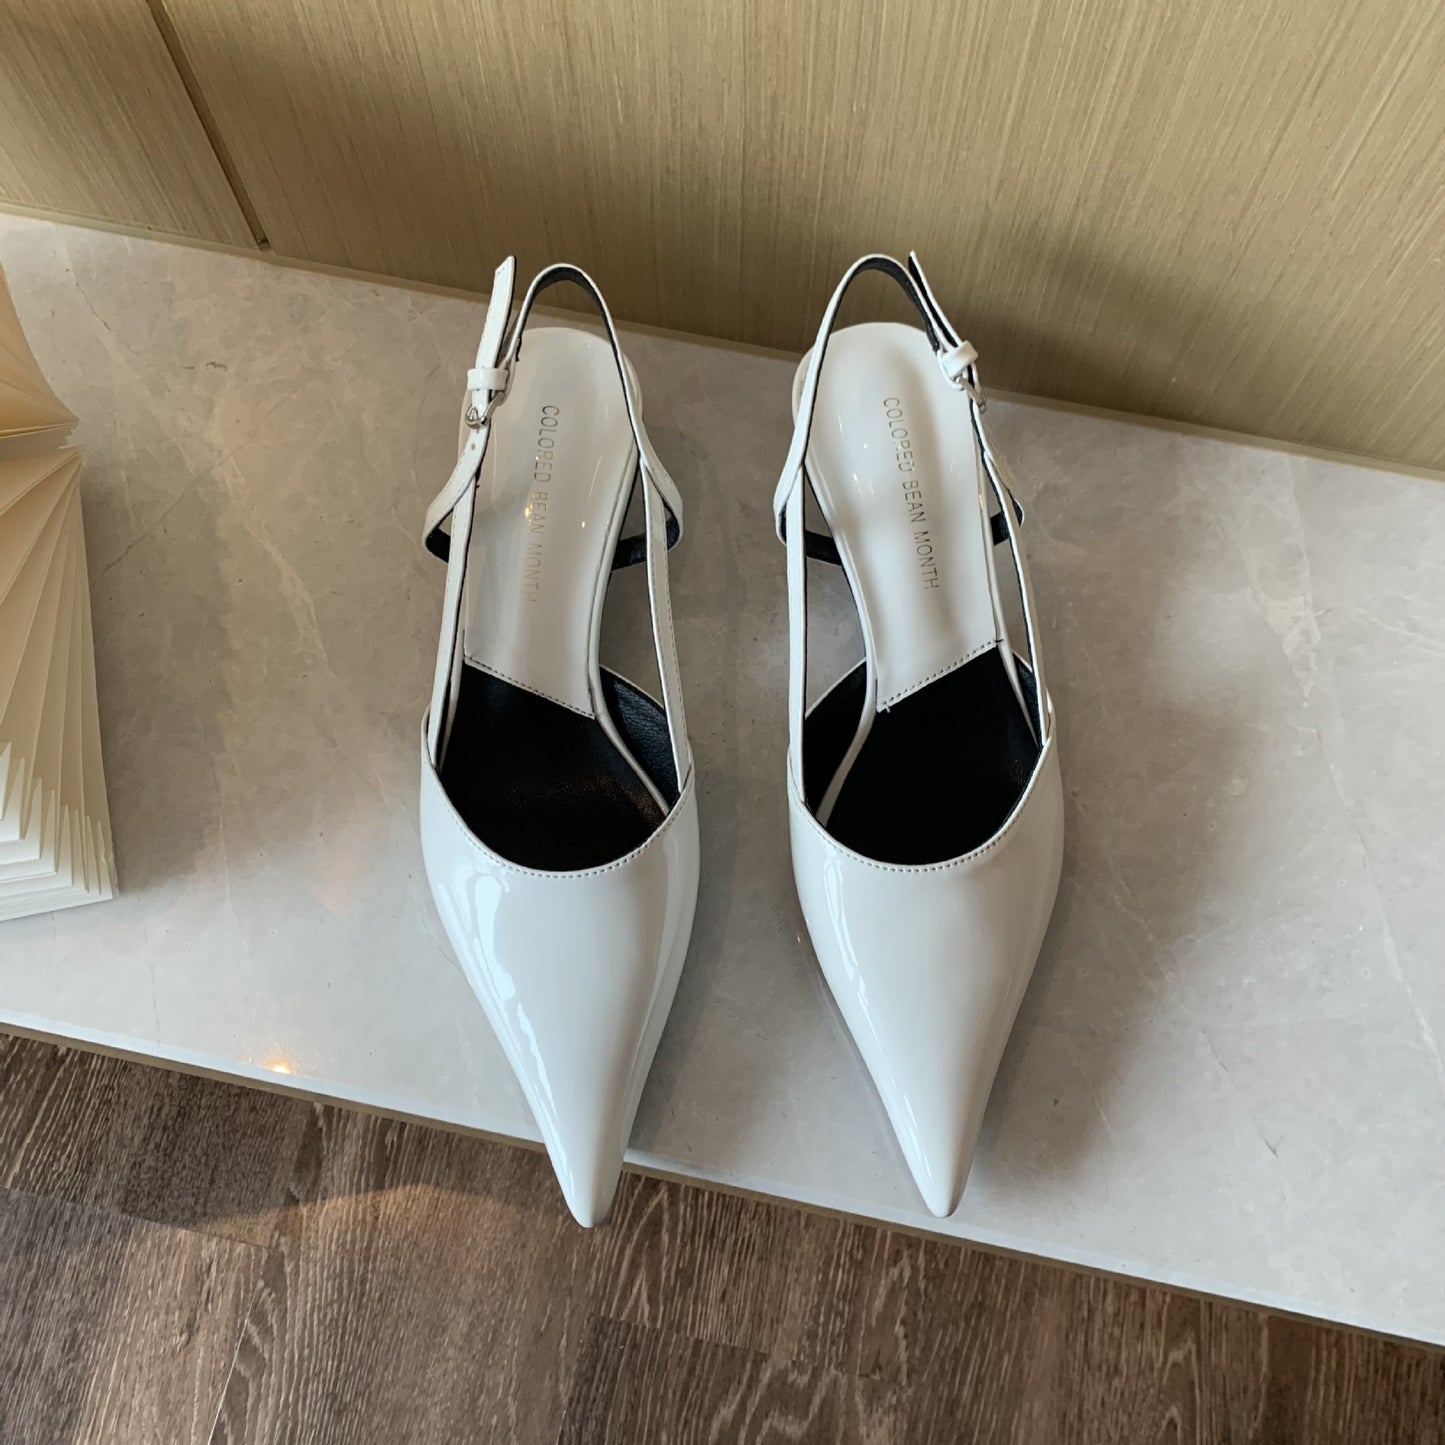 Closed Toe Sandals Women's Stiletto Heel Pointed Toe Low-cut Shoes